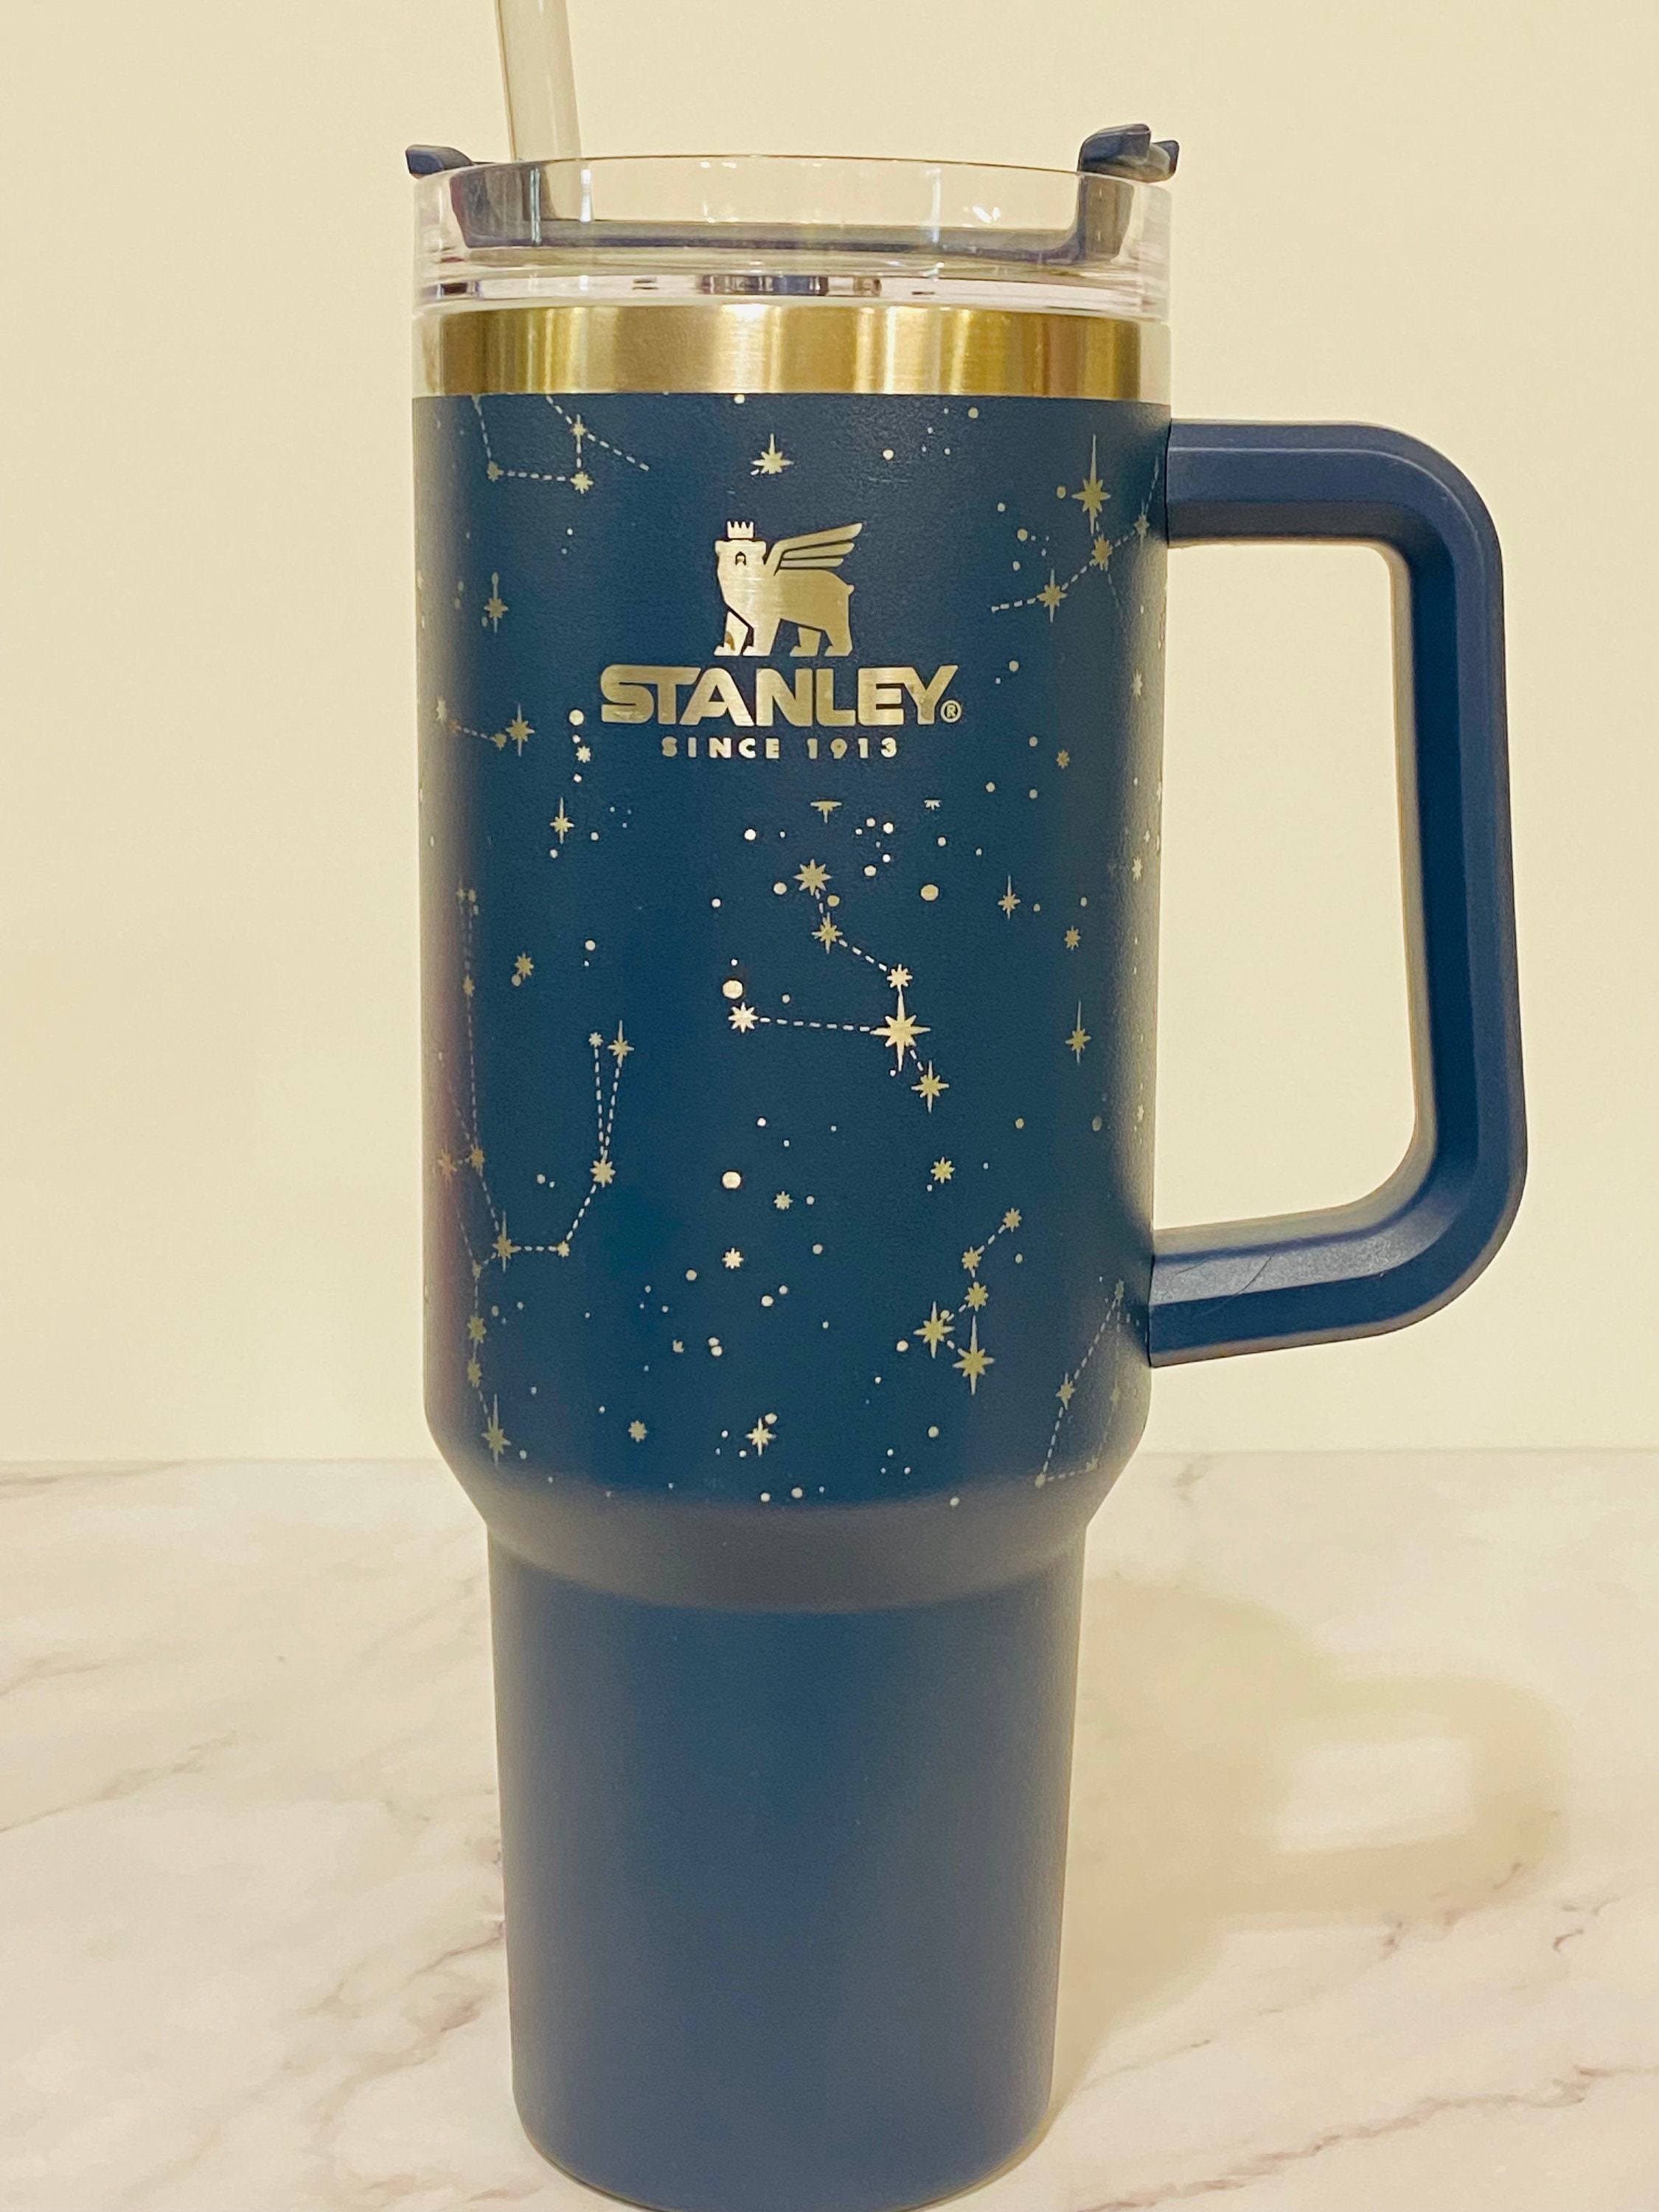 Stanley Tumbler Obsession **NO BUY/SALE/TRADE**